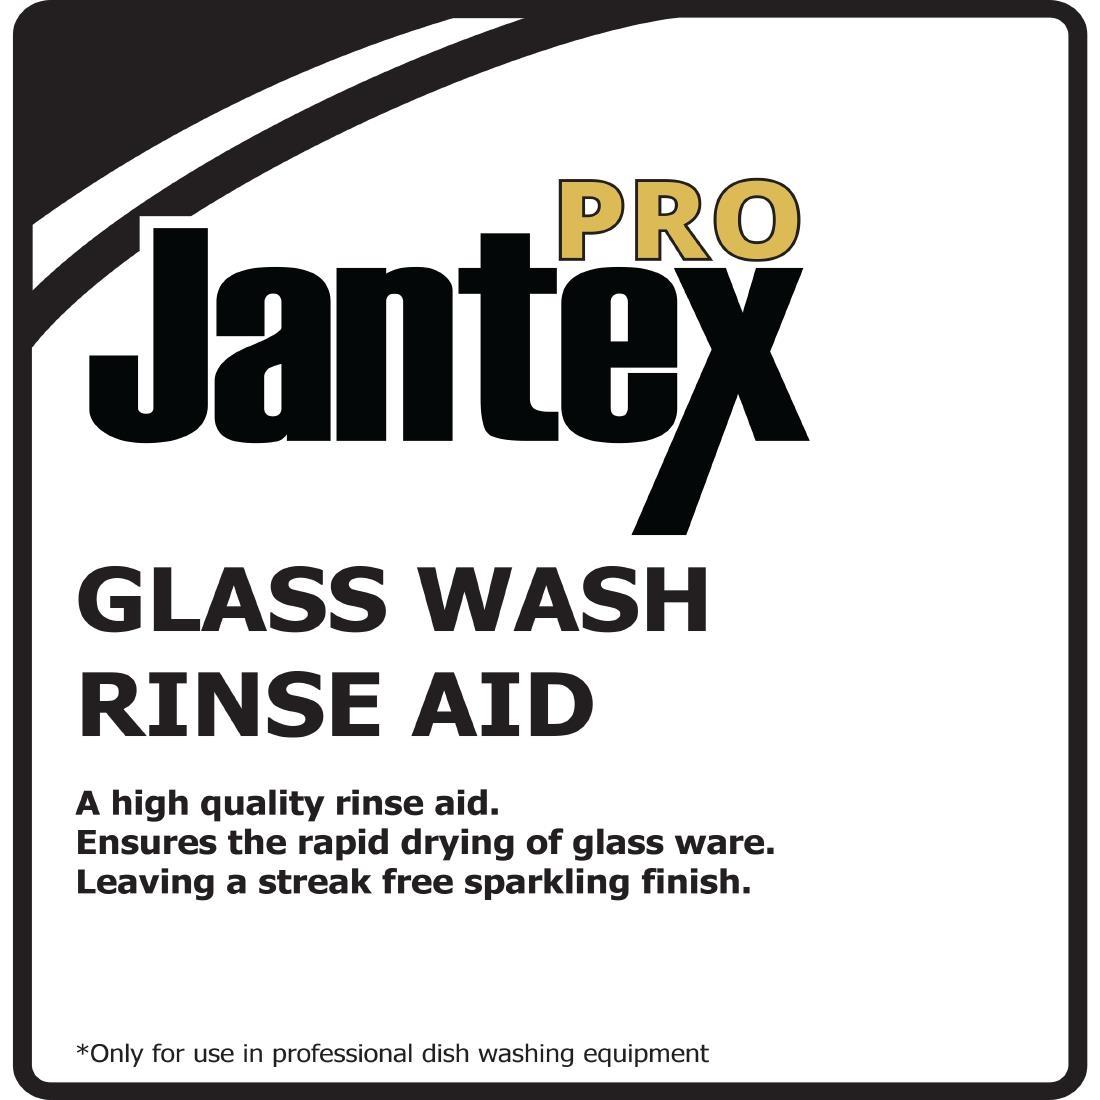 Jantex Pro Glasswasher Rinse Aid Concentrate 5Ltr - GM984  - 2